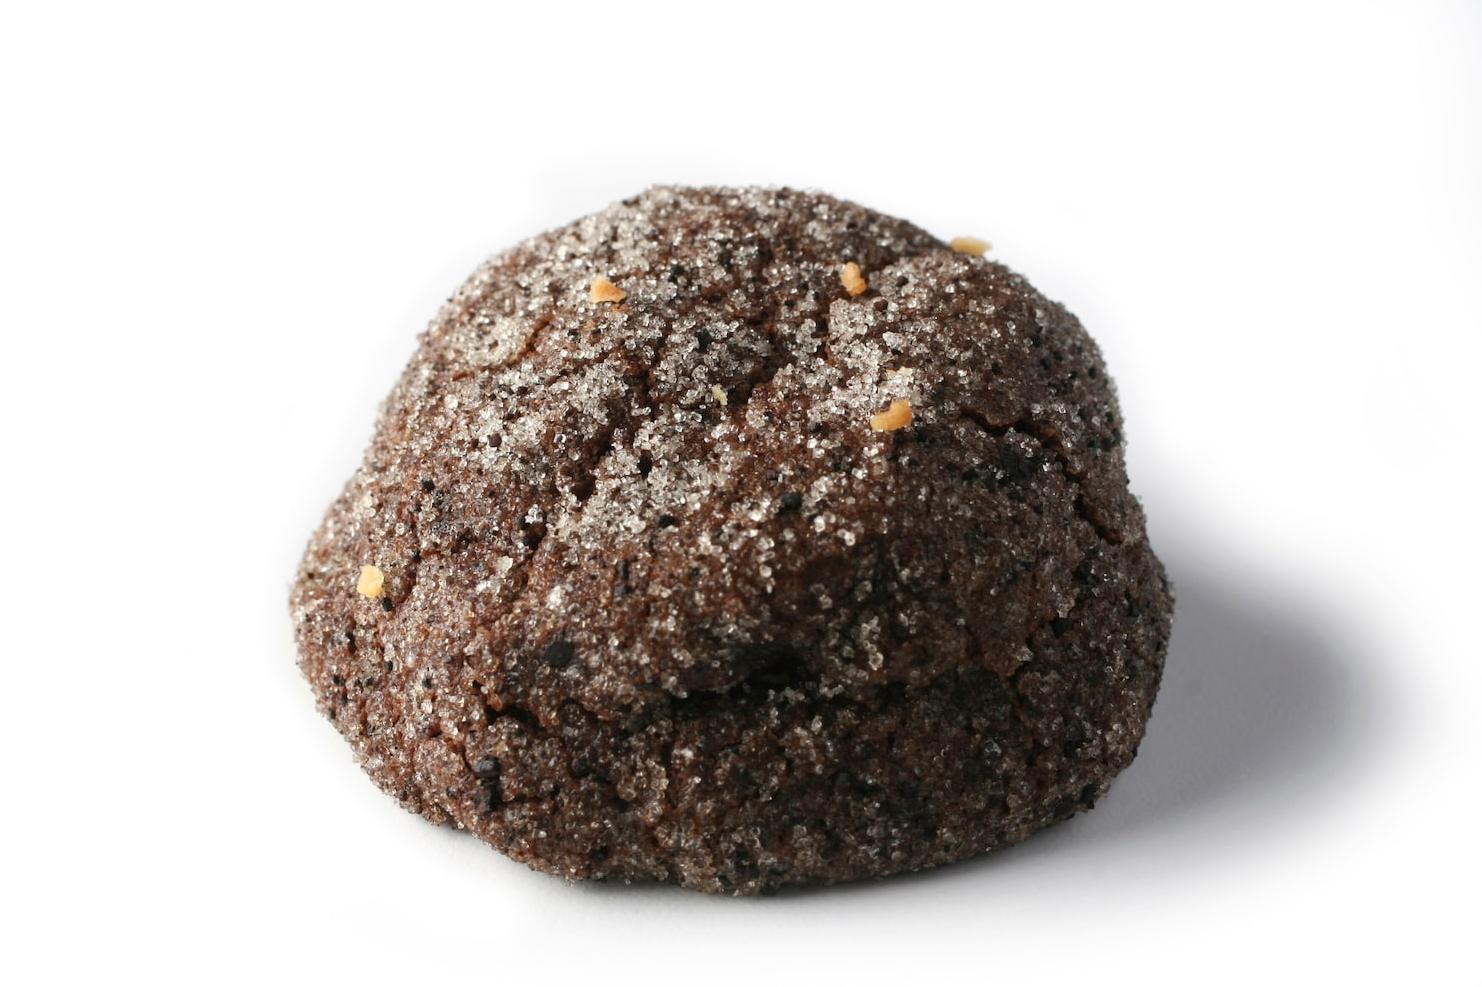  Get ready to indulge in a deliciously decadent cookie!